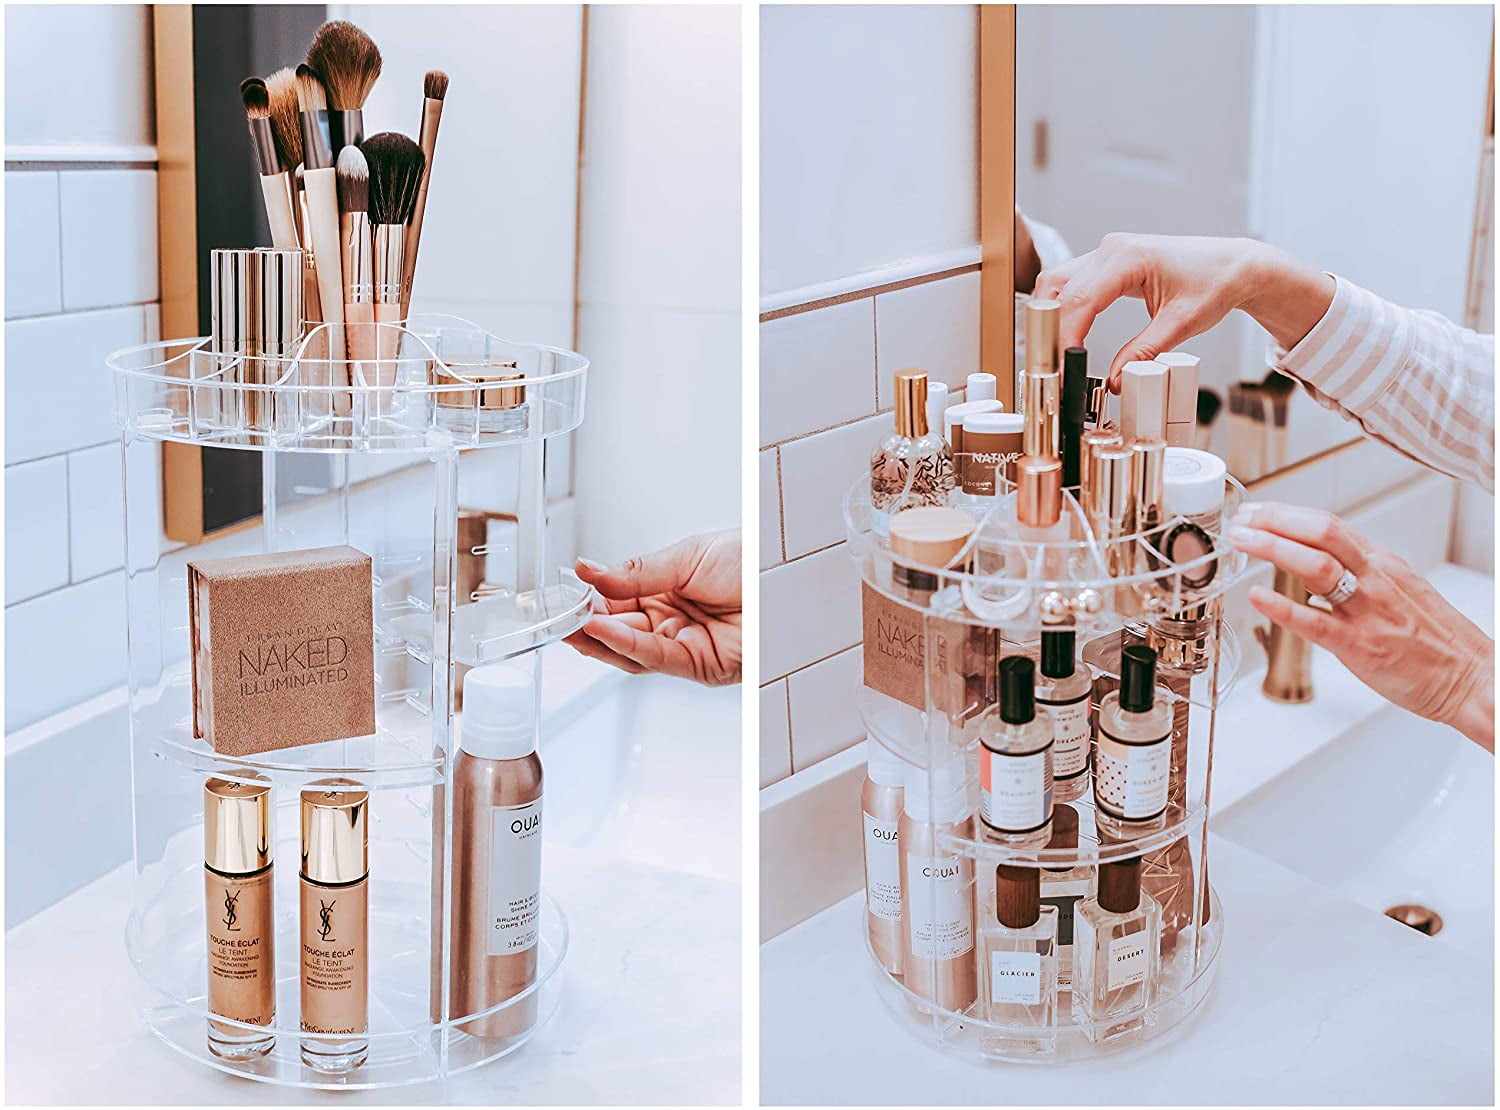 Rotating Makeup Organizer by Tranquil Abode